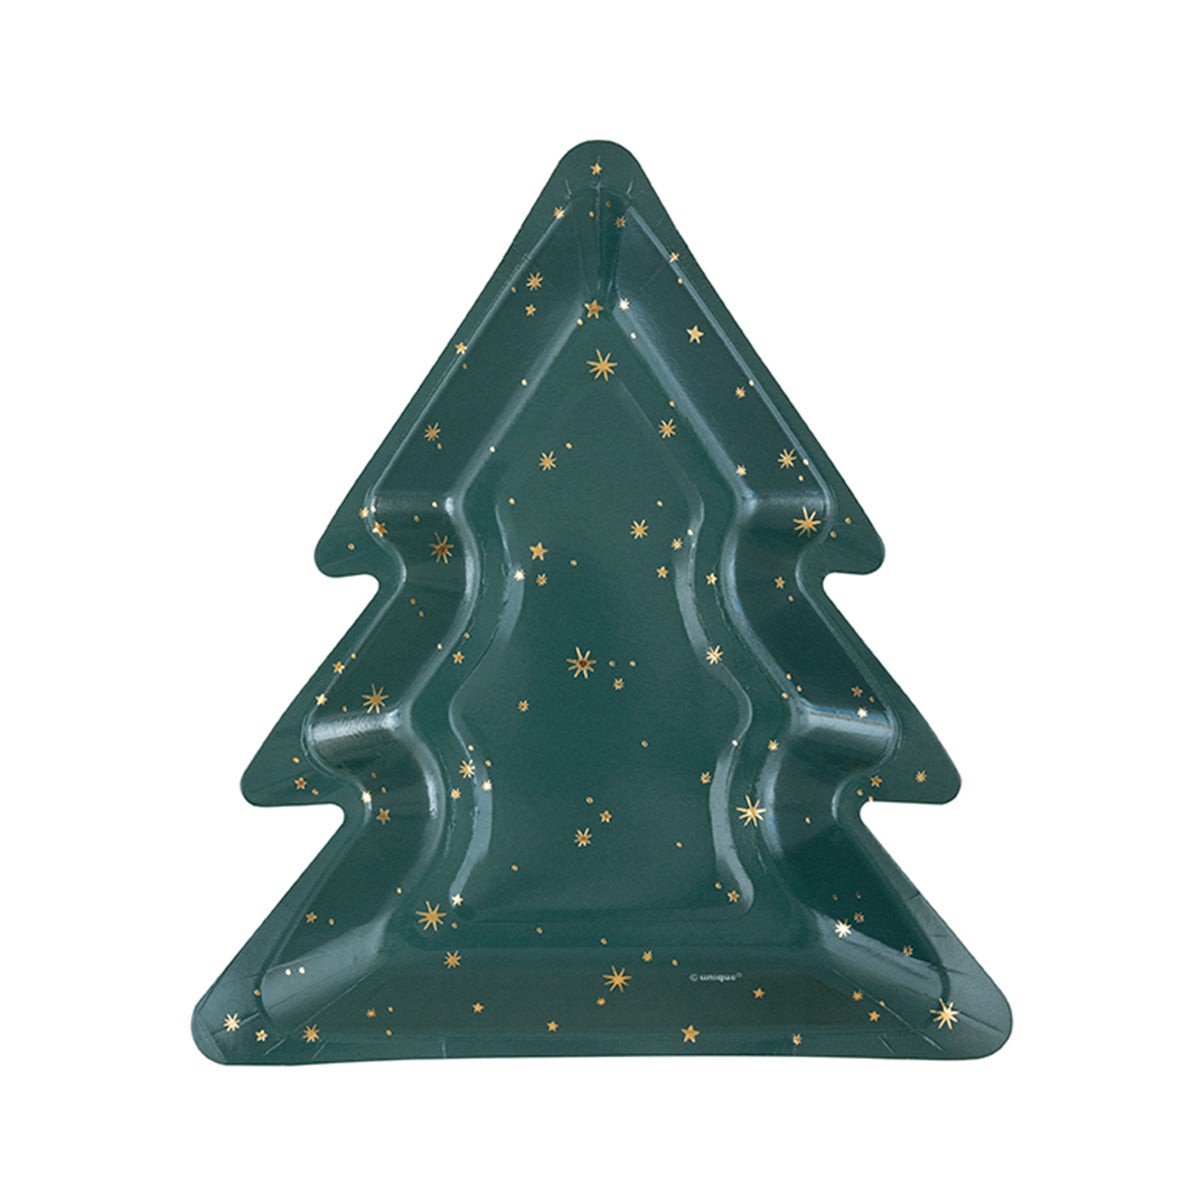 UNIQUE PARTY FAVORS Christmas Modern Christmas Tree Shaped Paper Plates, 8 Count 011179281251